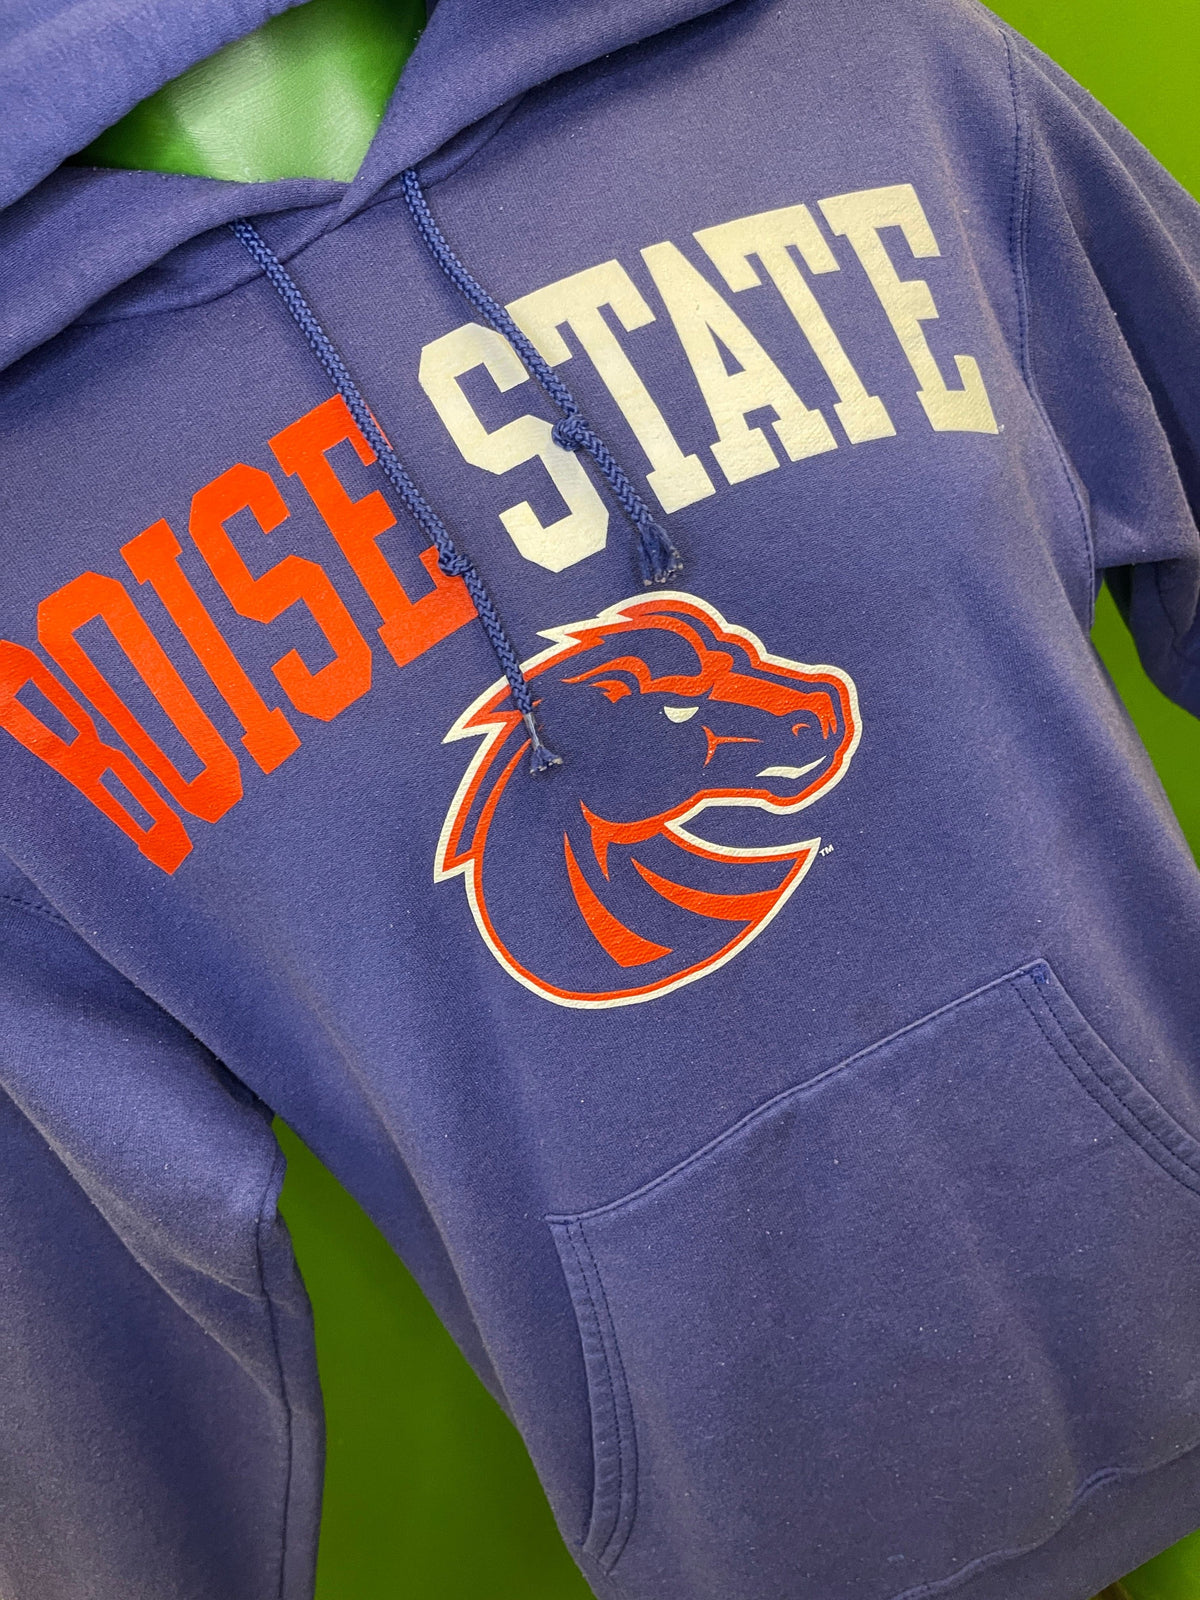 NCAA Boise State Broncos Vintage Champion Hoodie Men's Small